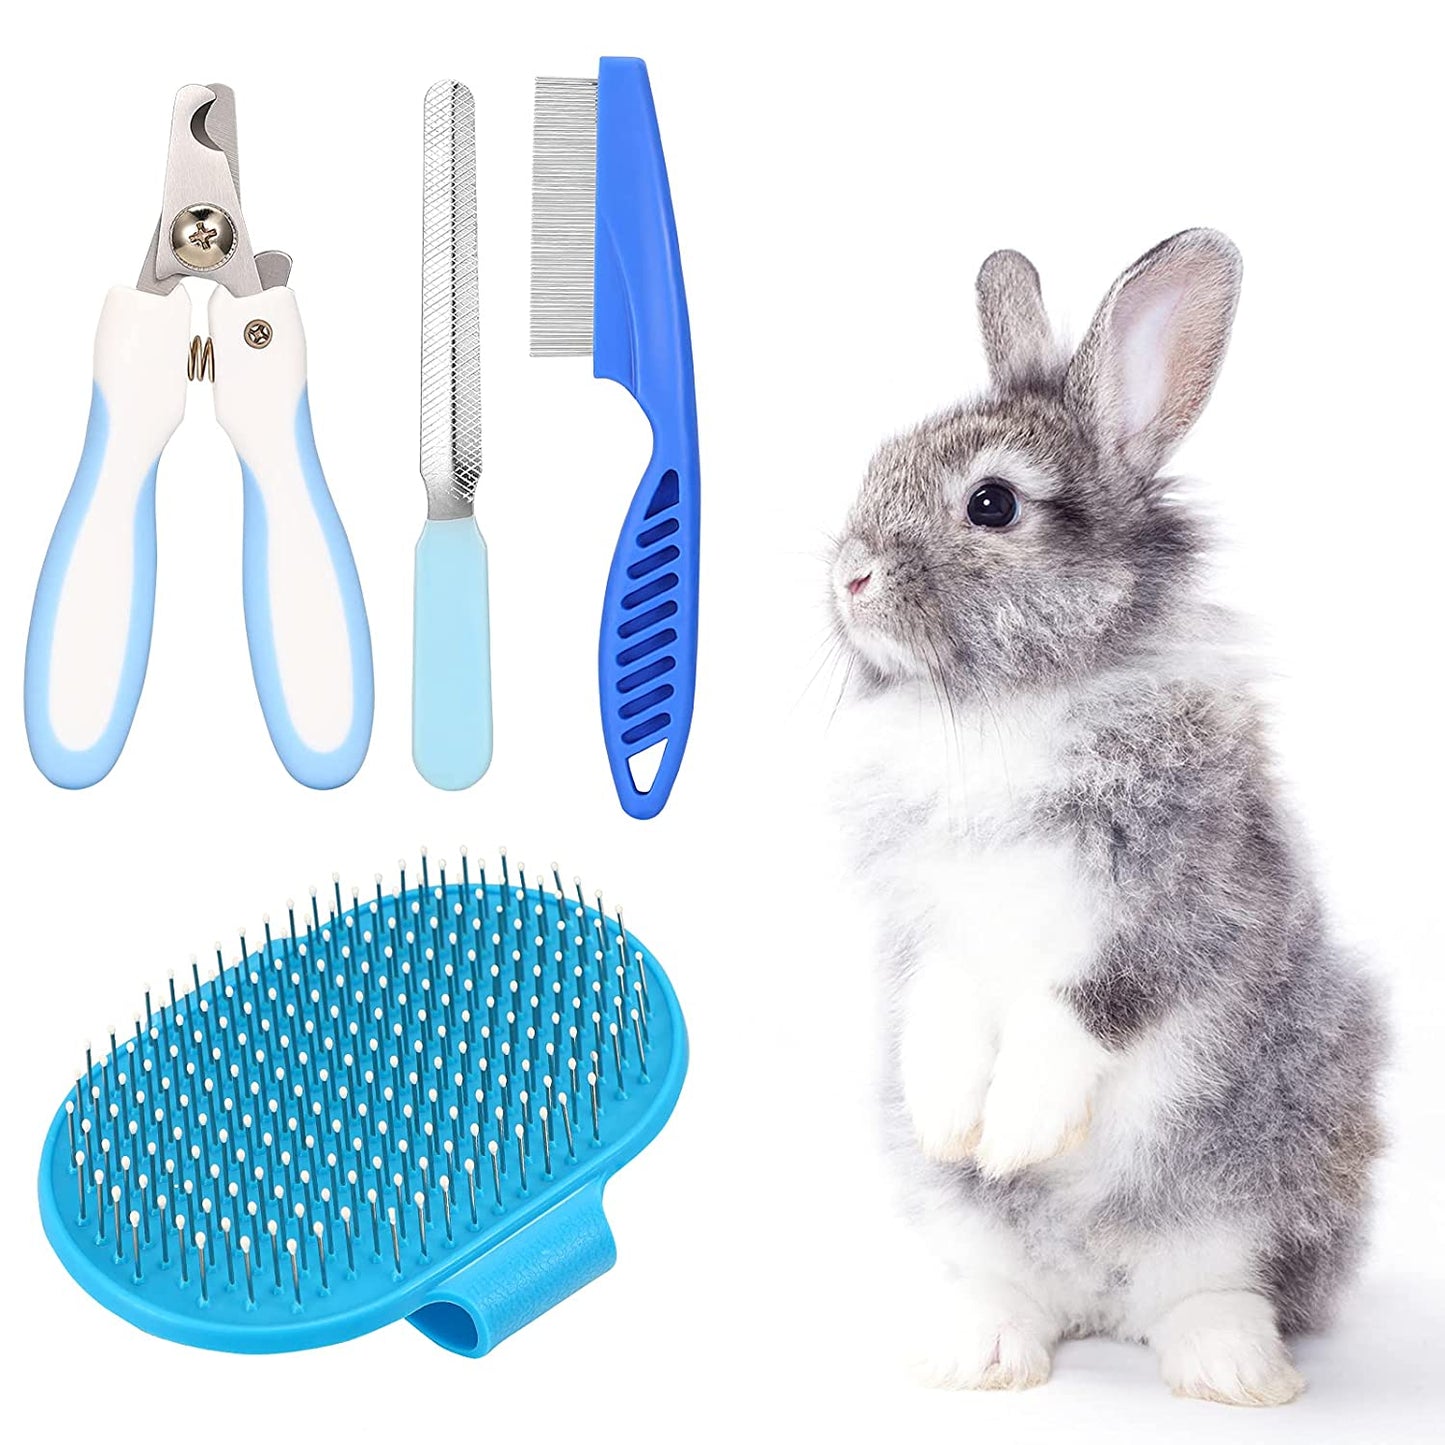 4 Pieces Bunny Grooming Kit with Bunny Grooming Brush Comb Pet Hair Remover Nail Clipper File Pet Shampoo Bath Brush with Adjustable Handle Pet Bath Grooming Set for Bunny Hamster Bunny Guinea Pig